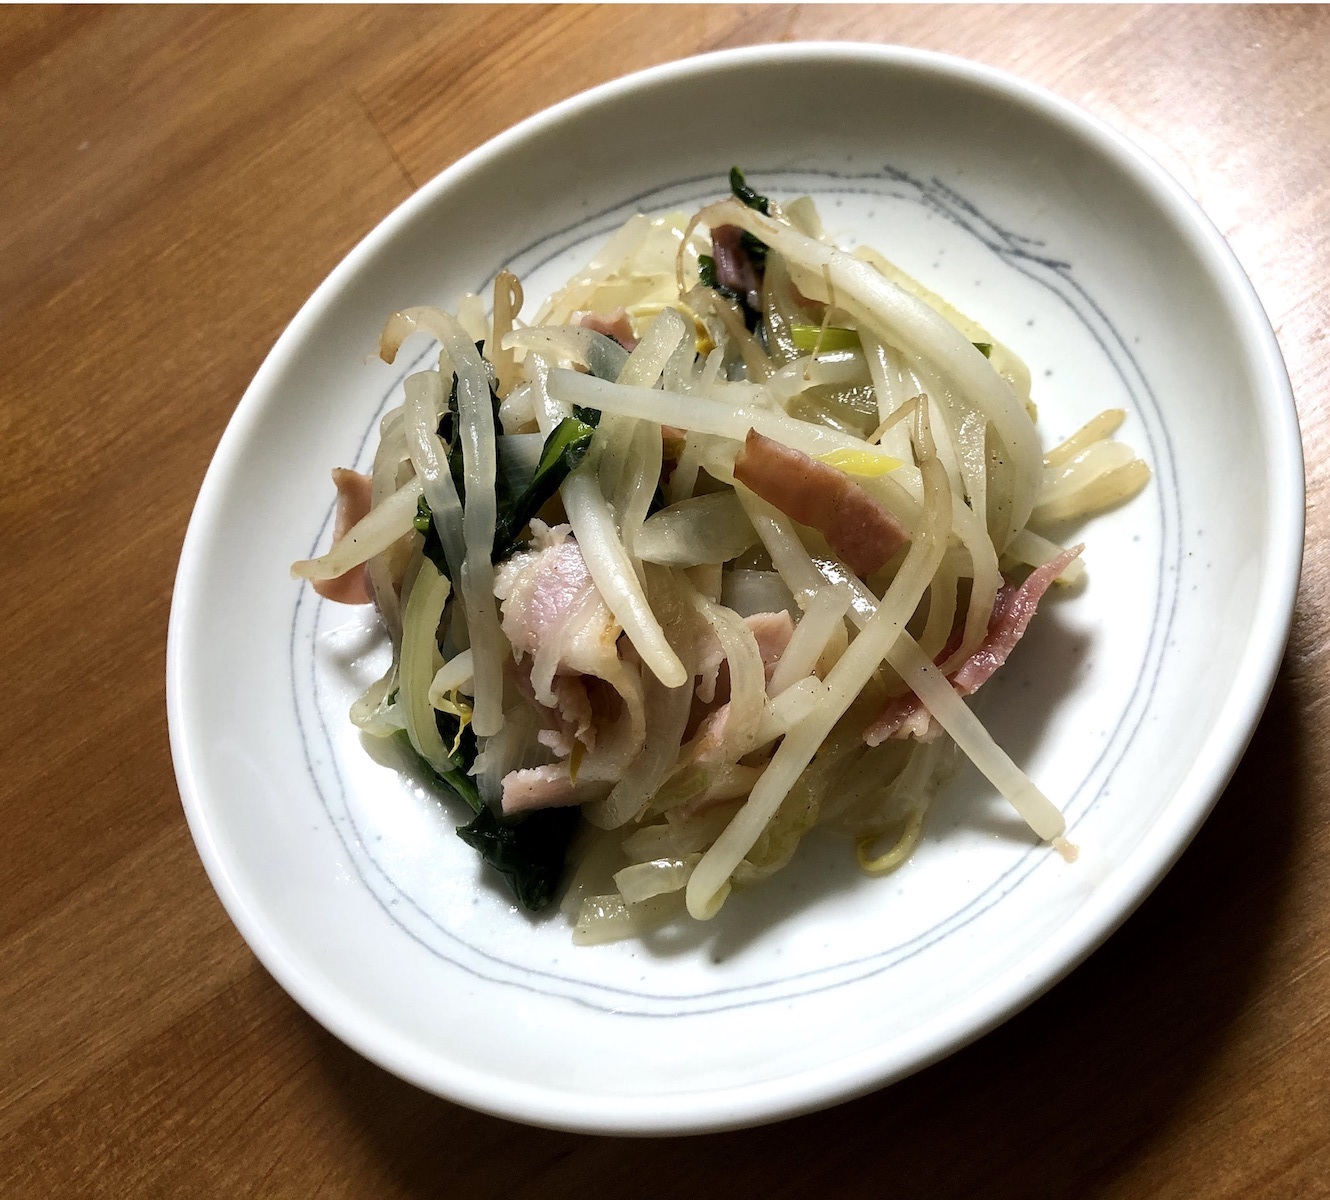 Bacon, bean sprouts, and spinach stir fry on a plate